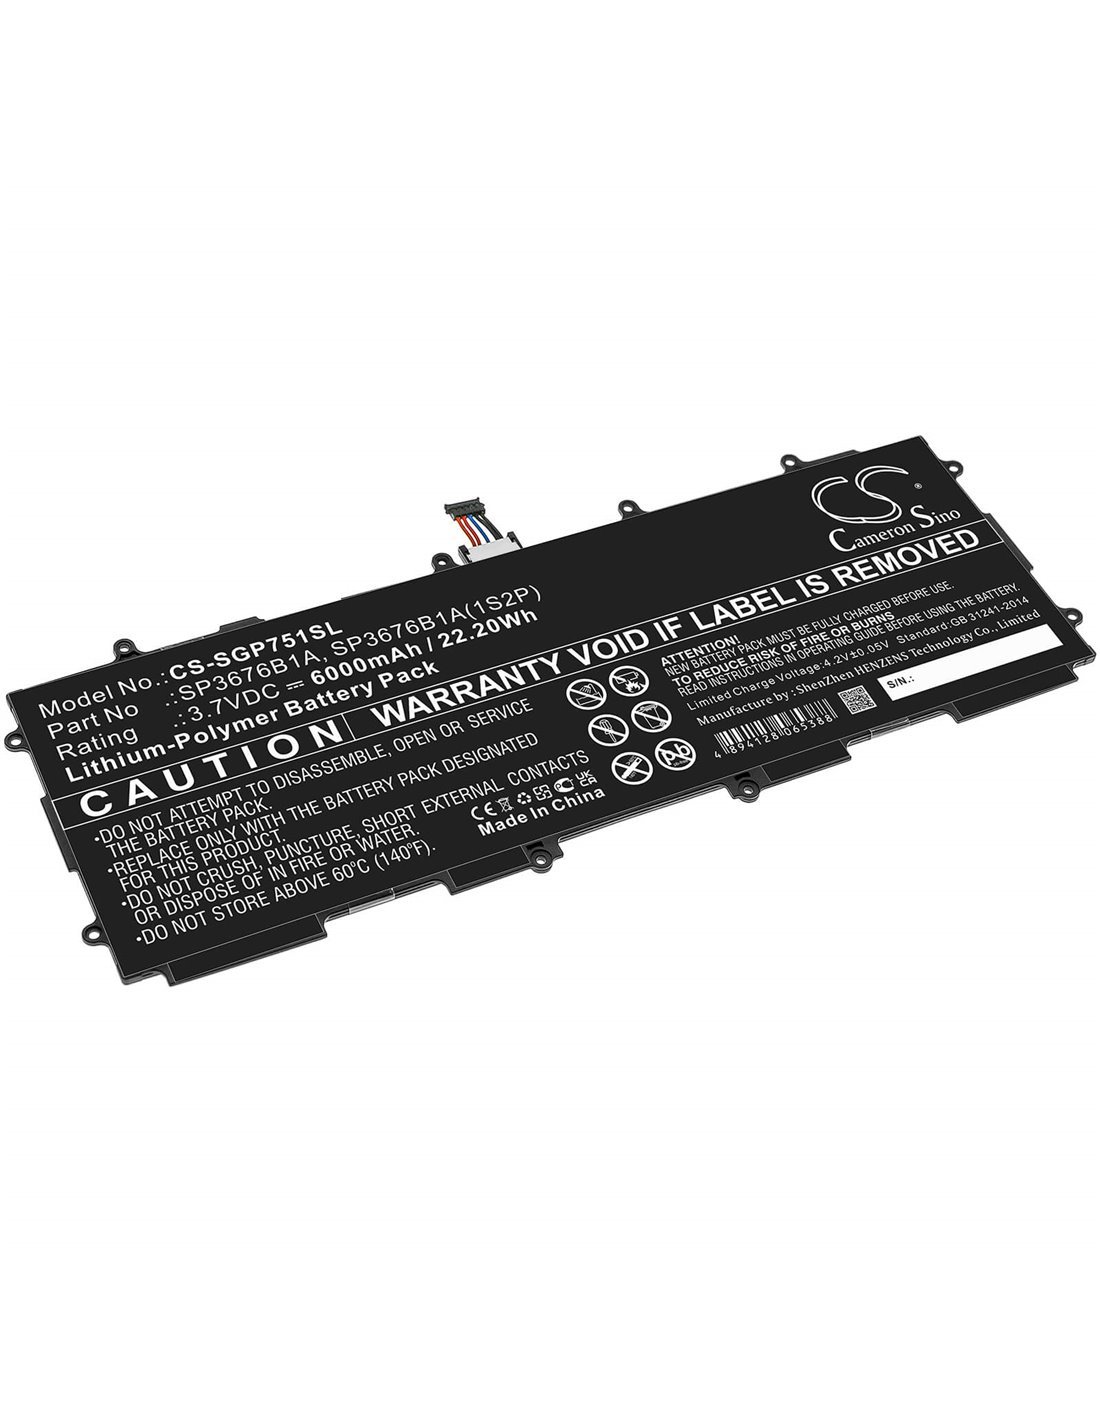 Battery for Samsung Gt-p7510, Galaxy Tab Gt-p7510, Galaxy Note 10.1 LTE, 3.7V, 6000mAh - 22.20Wh